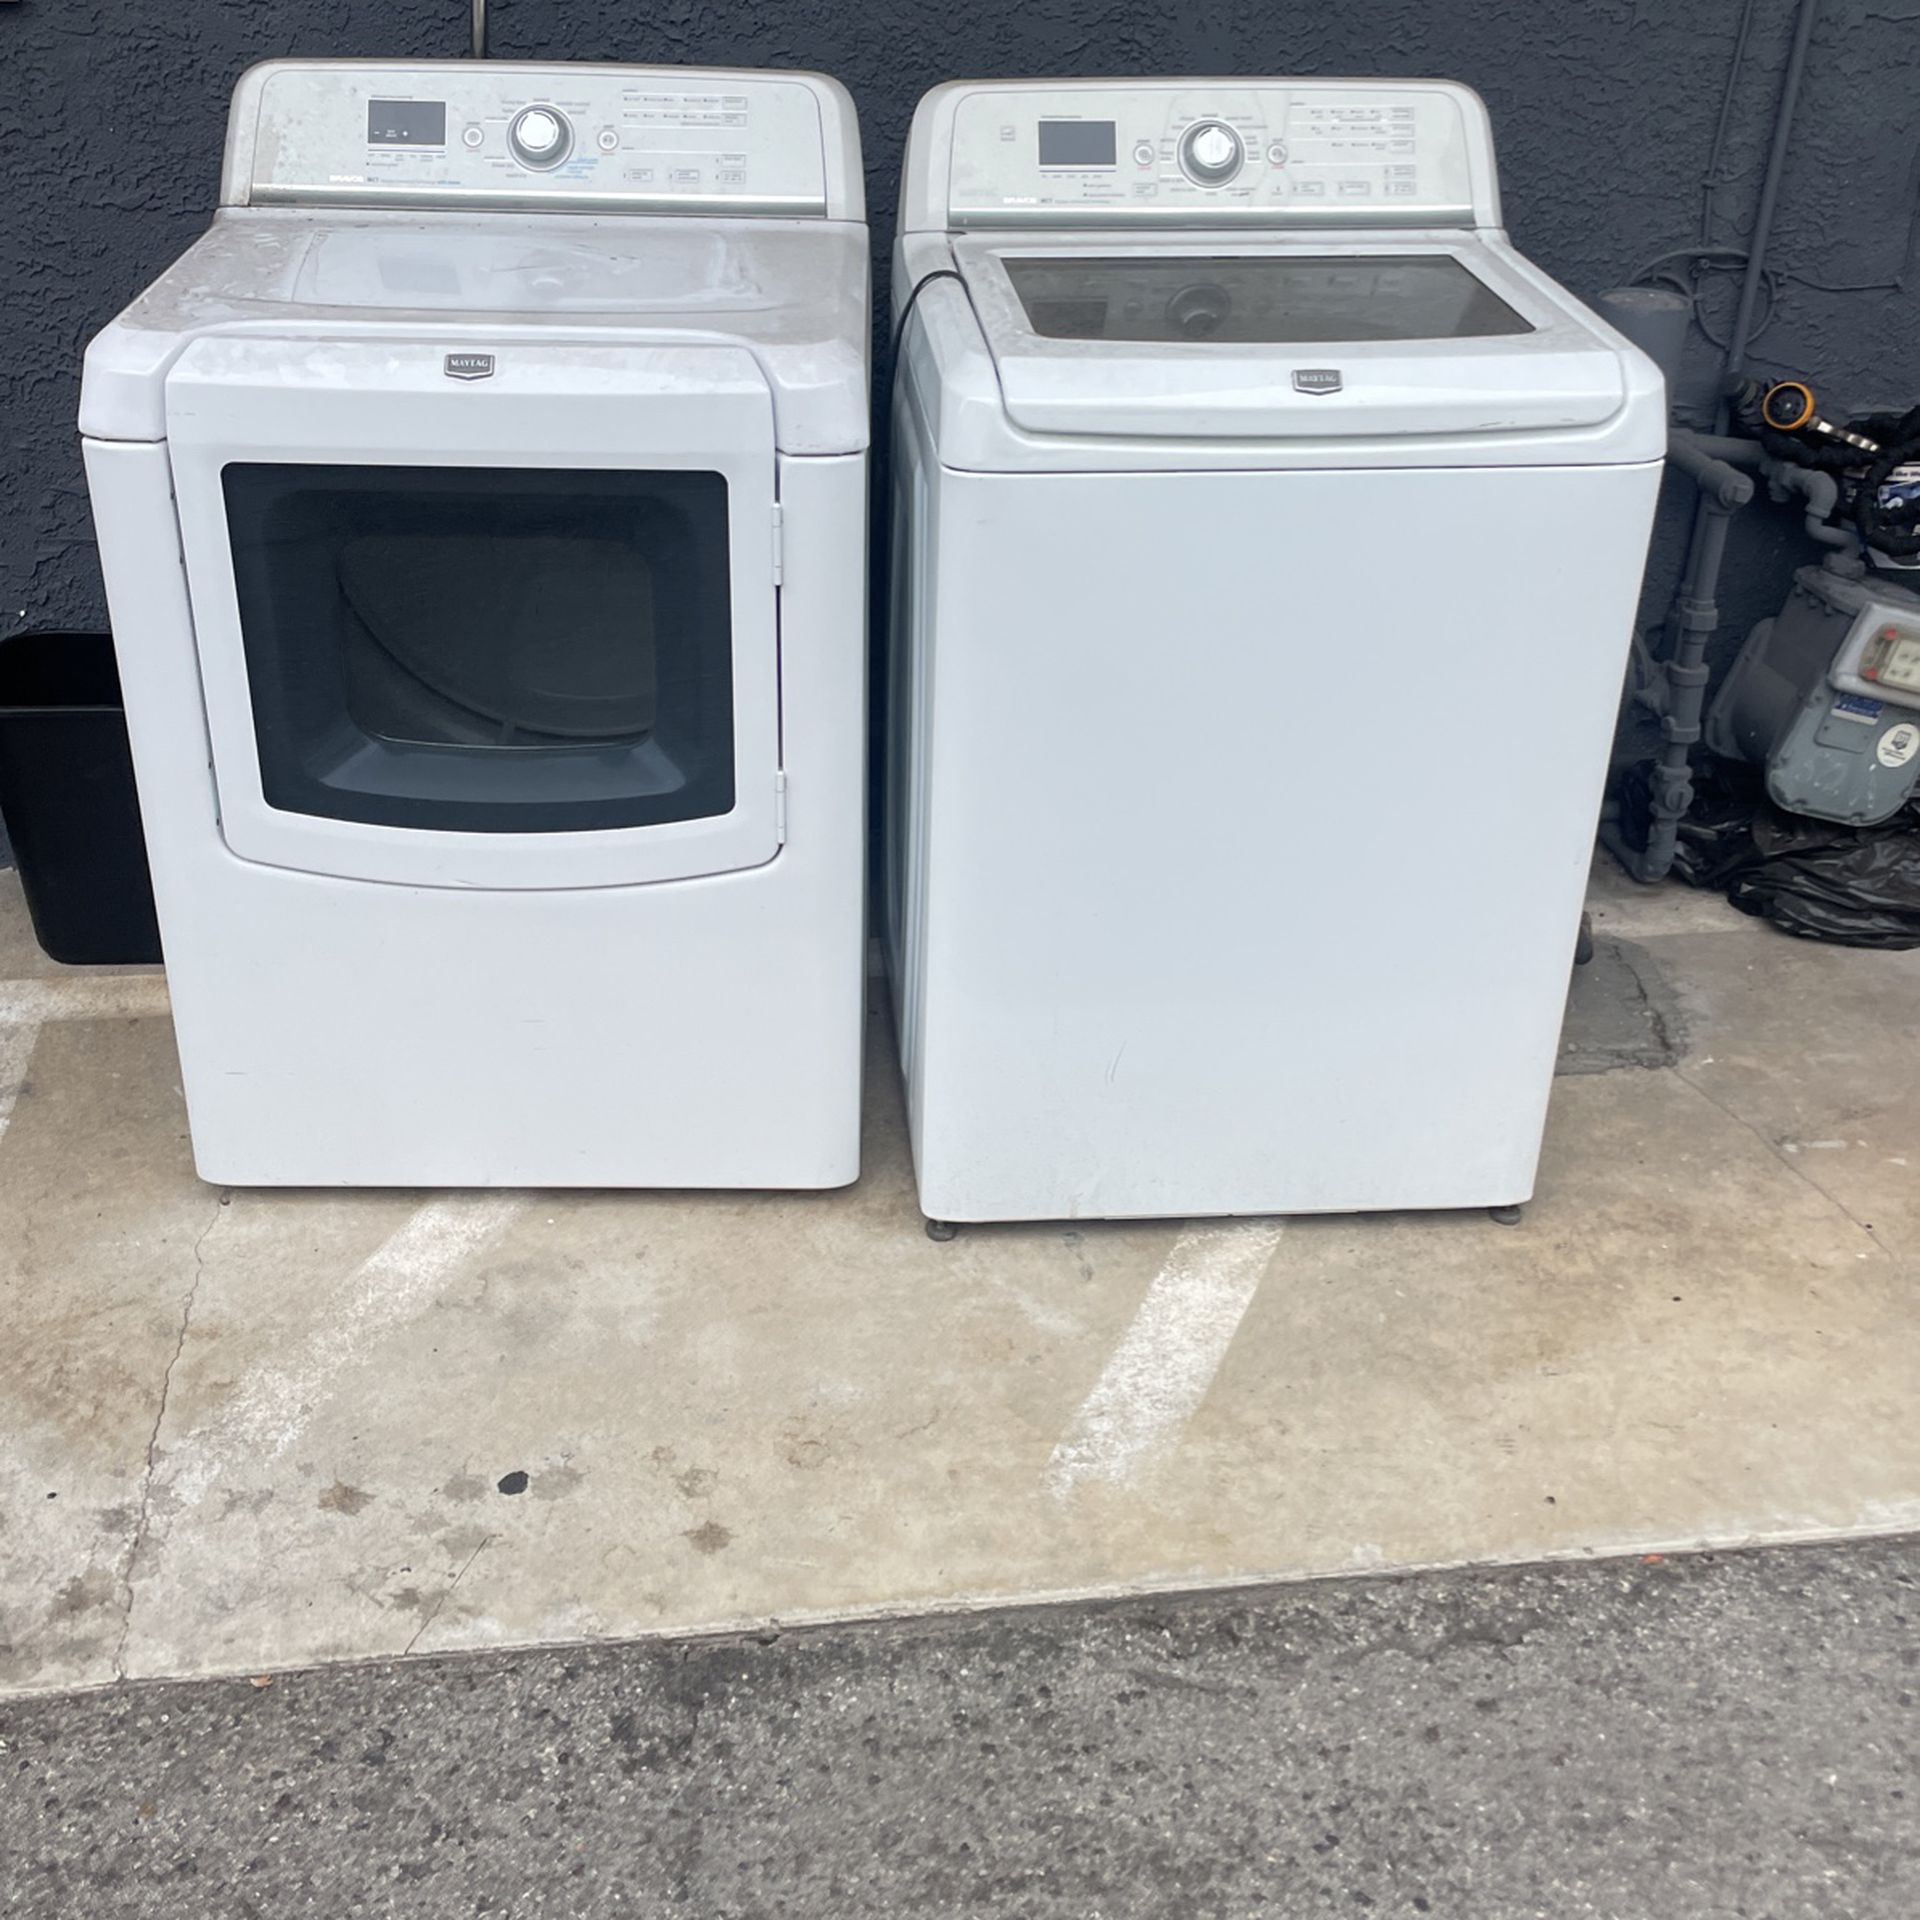 Maytag Washer And Dryer Set $350 Or Best Offer 